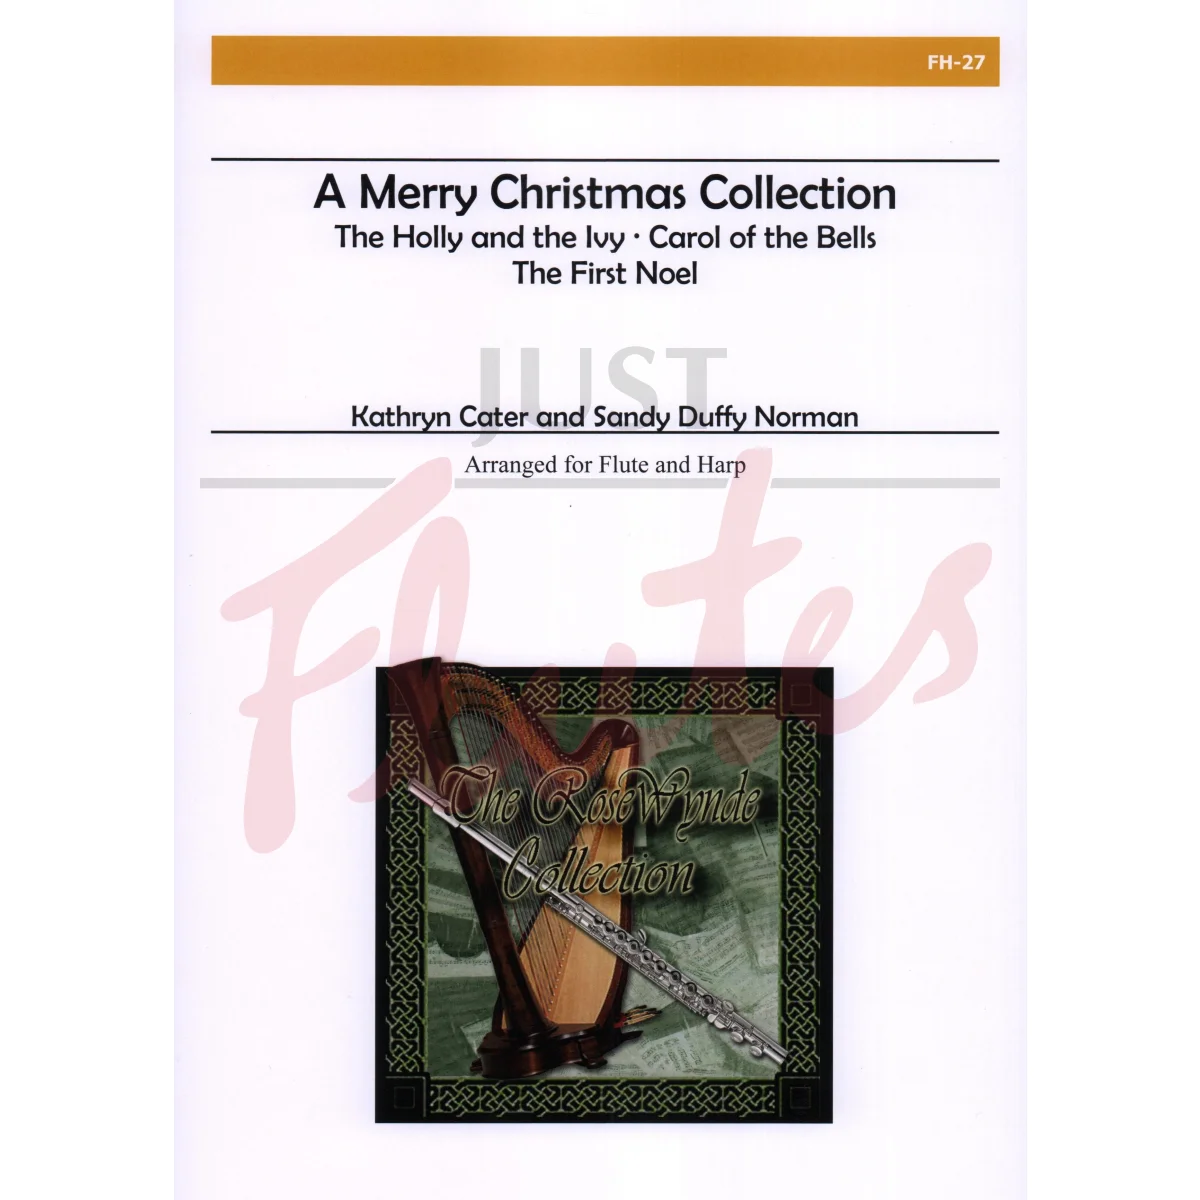 A Merry Christmas Collection for Flute and Harp